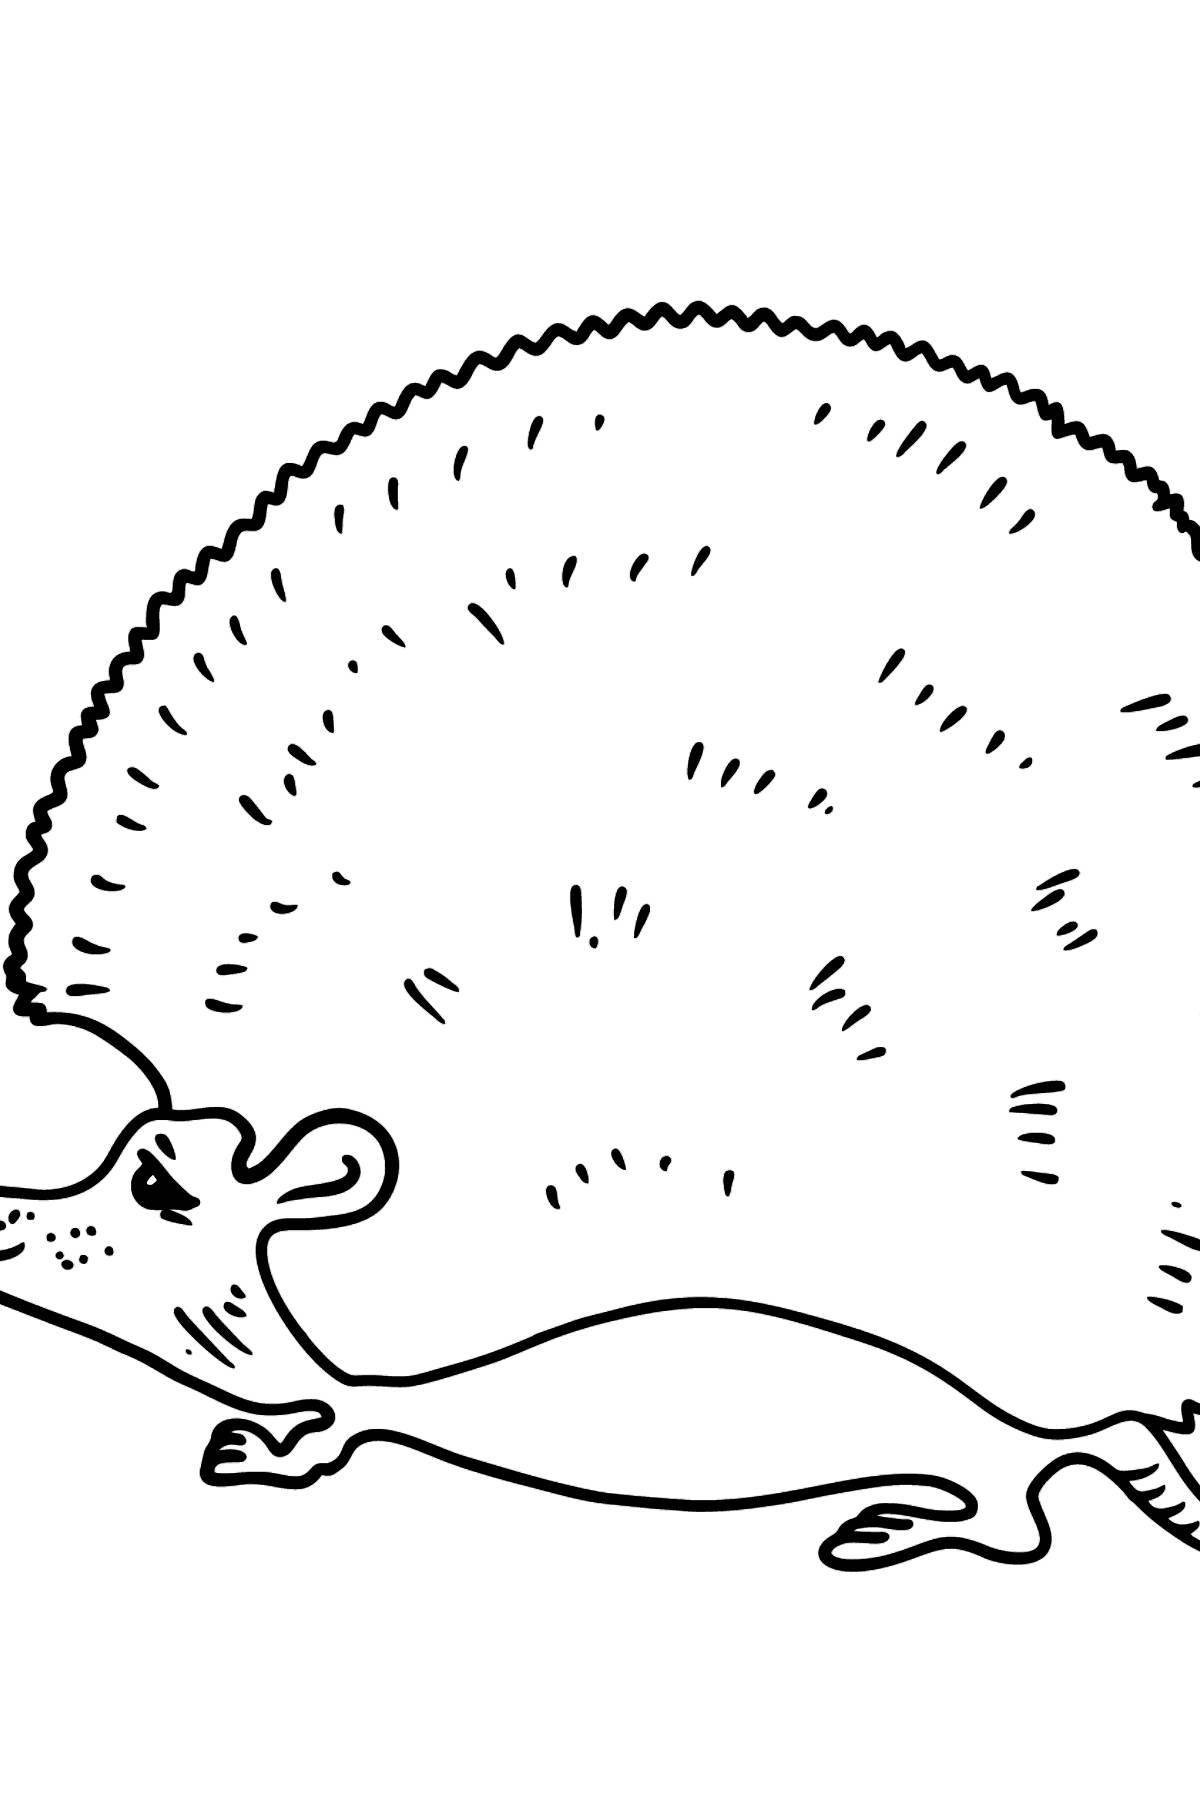 Attractive coloring hedgehog without needles